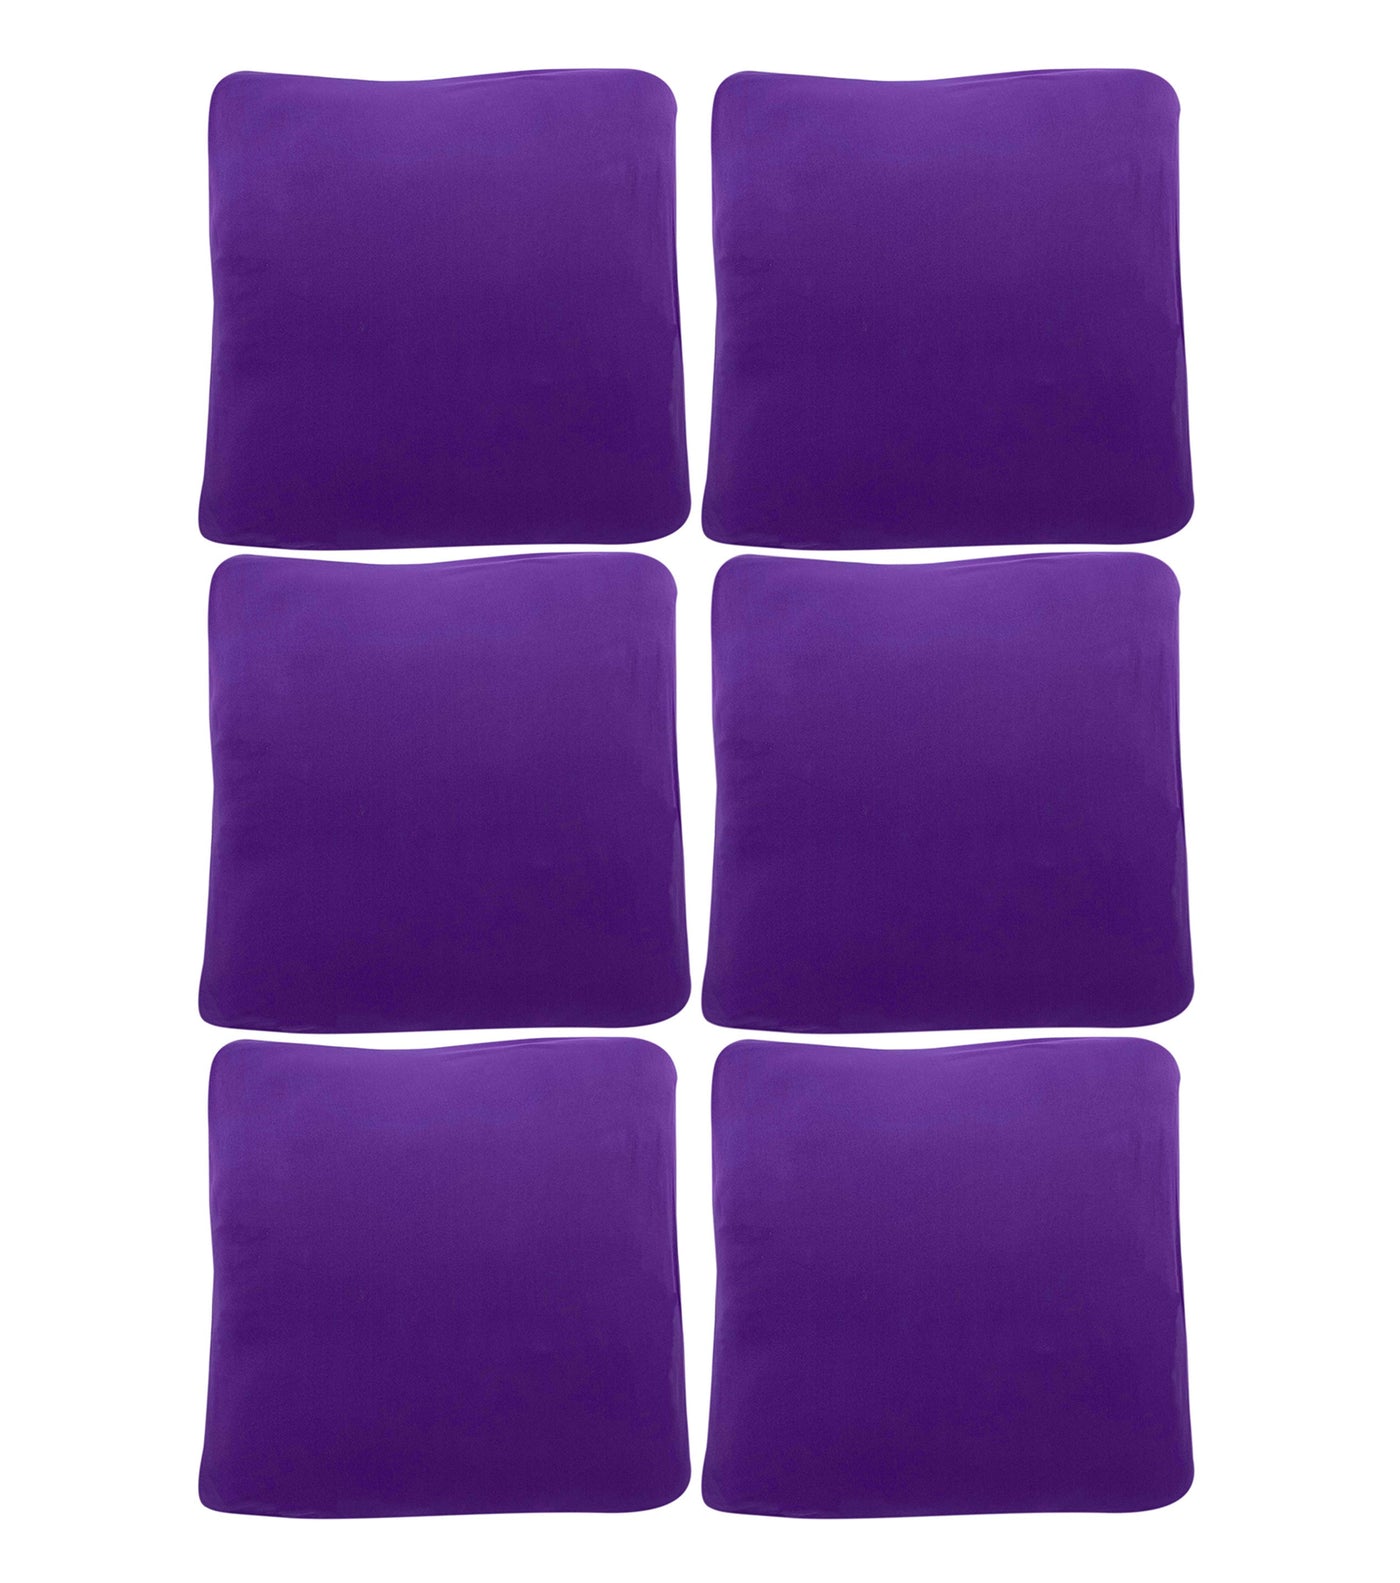 Polyester Cushion Cover - Grape